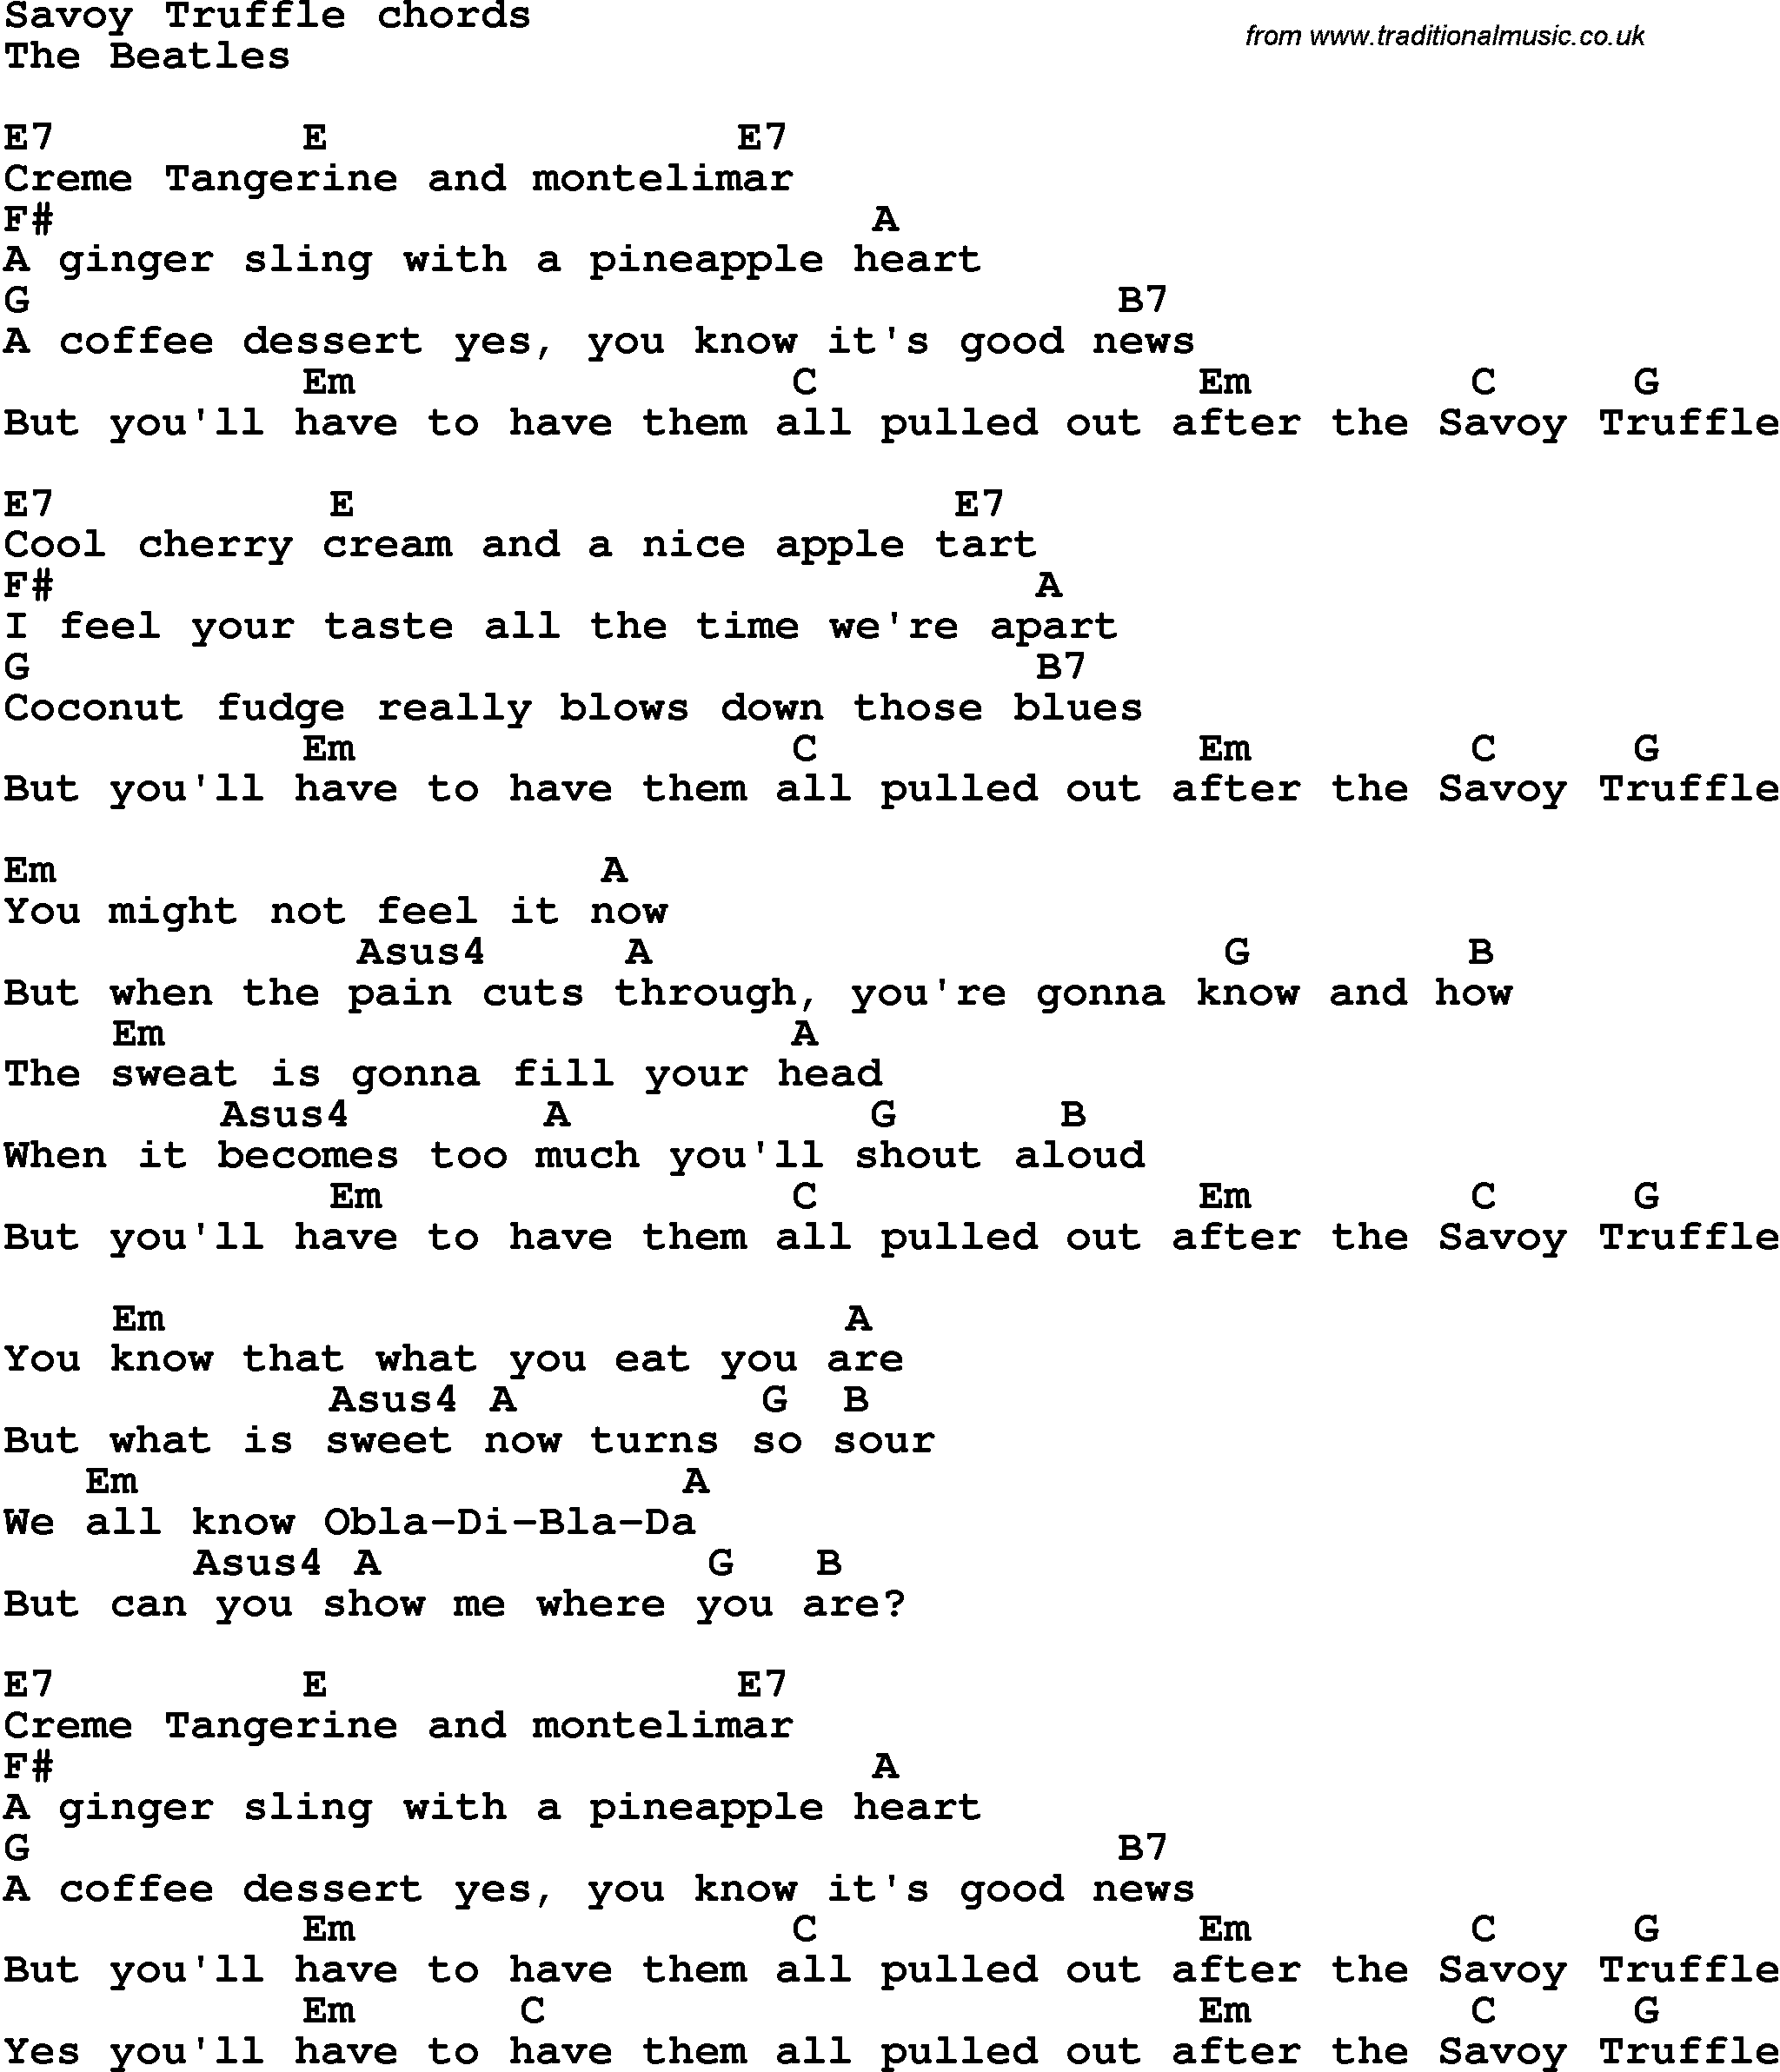 Song Lyrics with guitar chords for Savoy Truffle - The Beatles